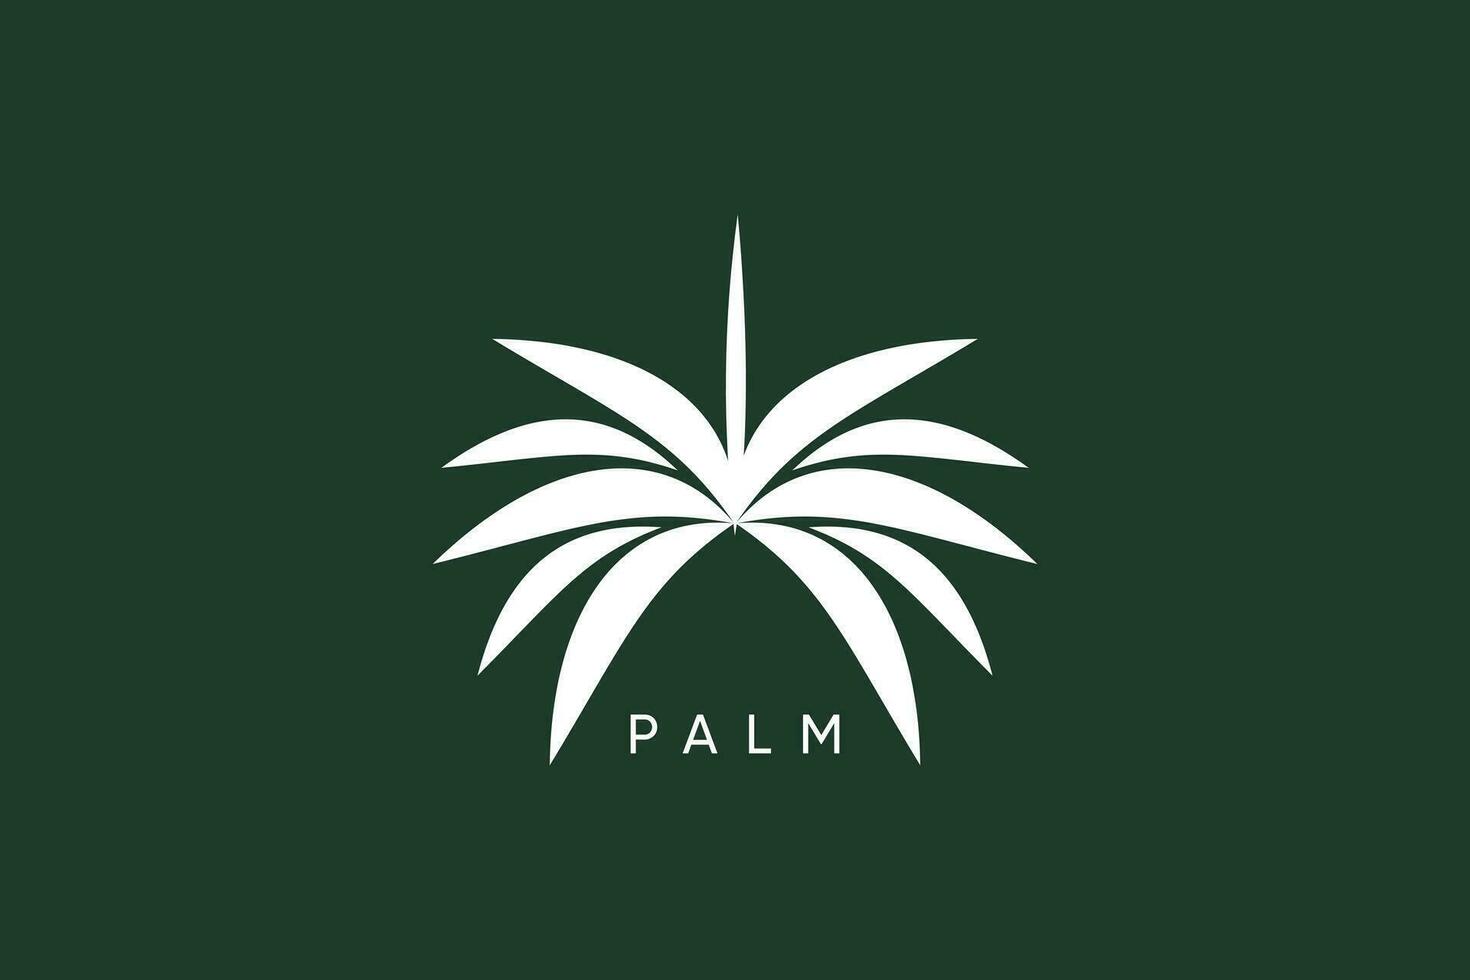 Palm tree logo design vector with modern concept